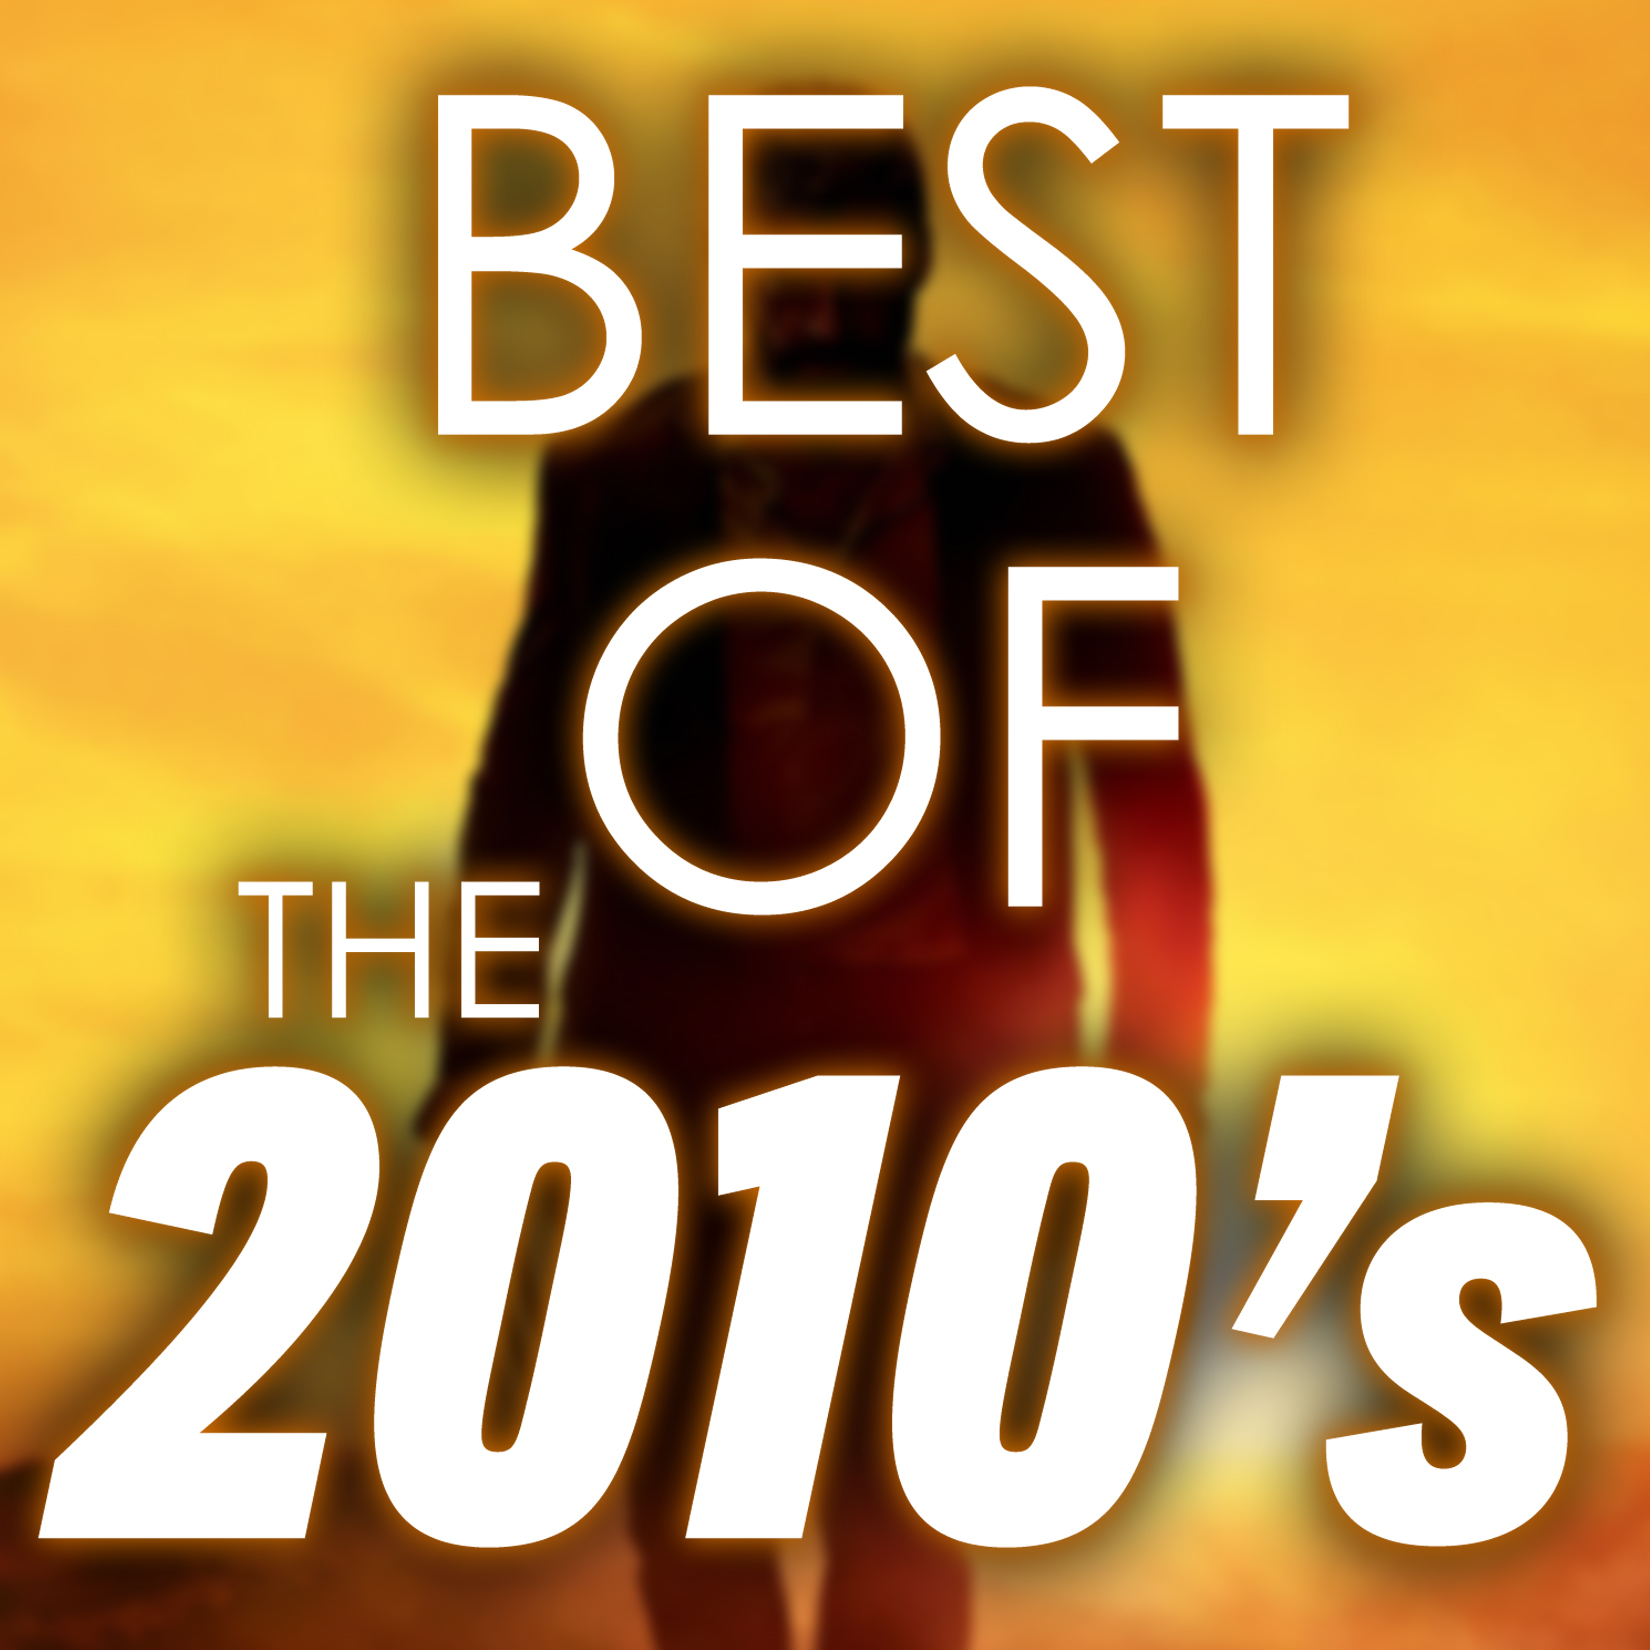 Episode 212: Best Movies of the 2010’s